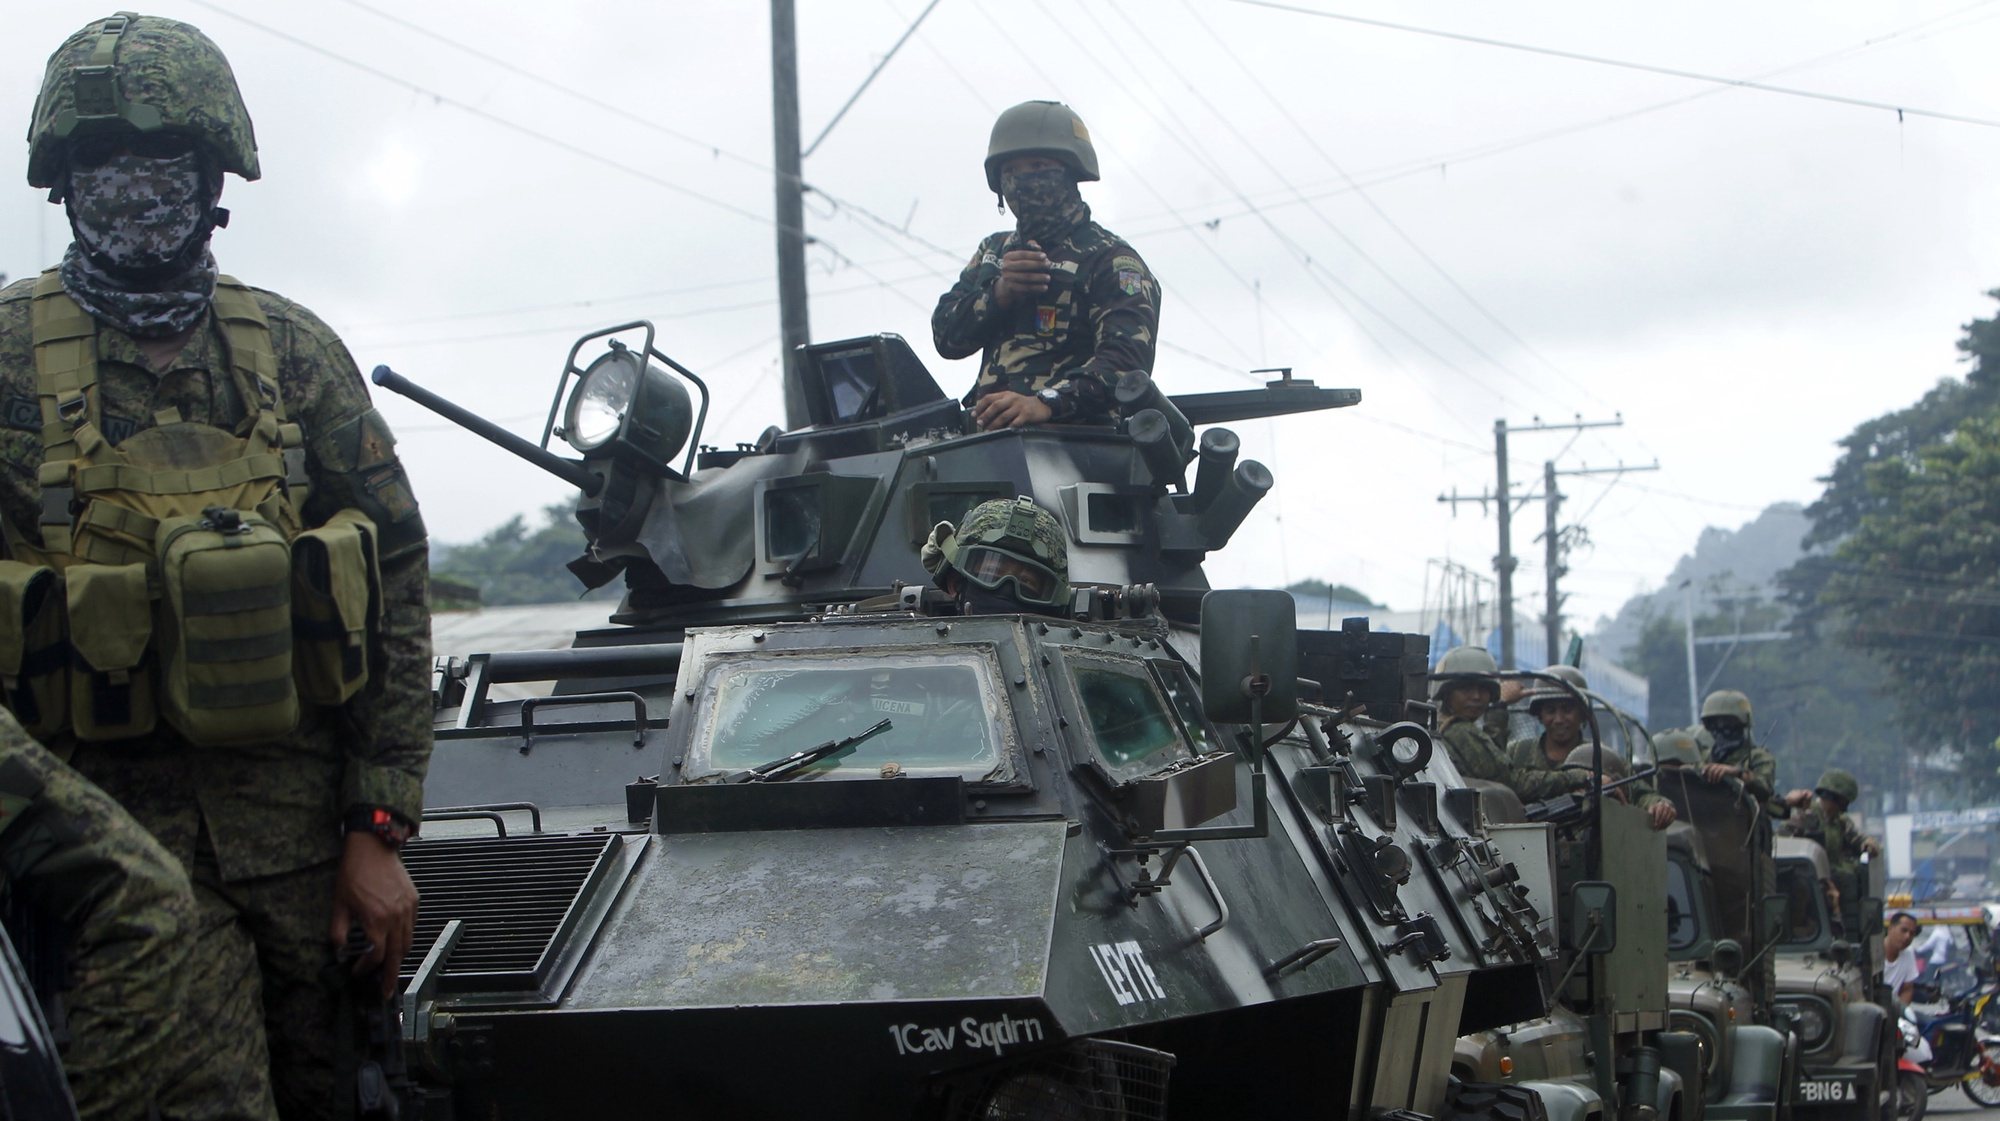 epa07308557 Philippine government troops on armored vehicles conduct a patrol a day after the plebiscite on the Bangsamoro Organic Law (BOL) in Jolo town, in the volatile island of Sulu, southern Philippines, 22 January 2019. On 21 January, over two million Filipinos voted in a referendum to ratify a much-awaited peace agreement with Islamist separatists for creating an autonomous region in restive Mindanao of the Philippines. The plebiscite asked voters if they backed the Bangsamoro Organic Law on creating a self-ruled region to end decades of separatist conflict in the region. The vote follows an agreement between the government and the Moro Islamic Liberation Front that has been fighting for independence in southern Philippines.  EPA/BEN HAJAN